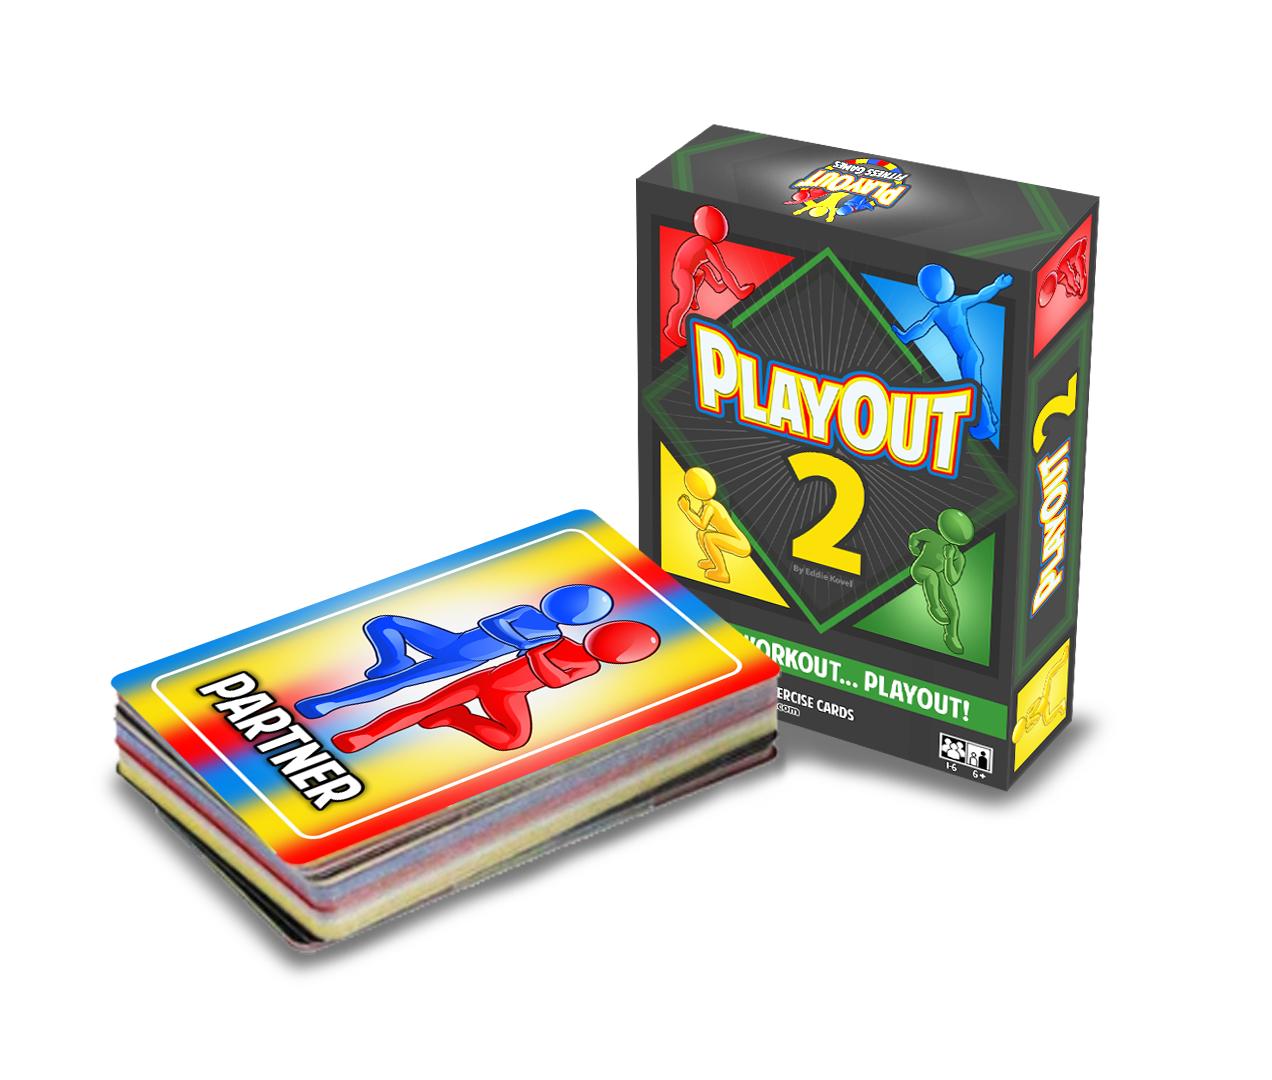 Playout 2: The Expansion